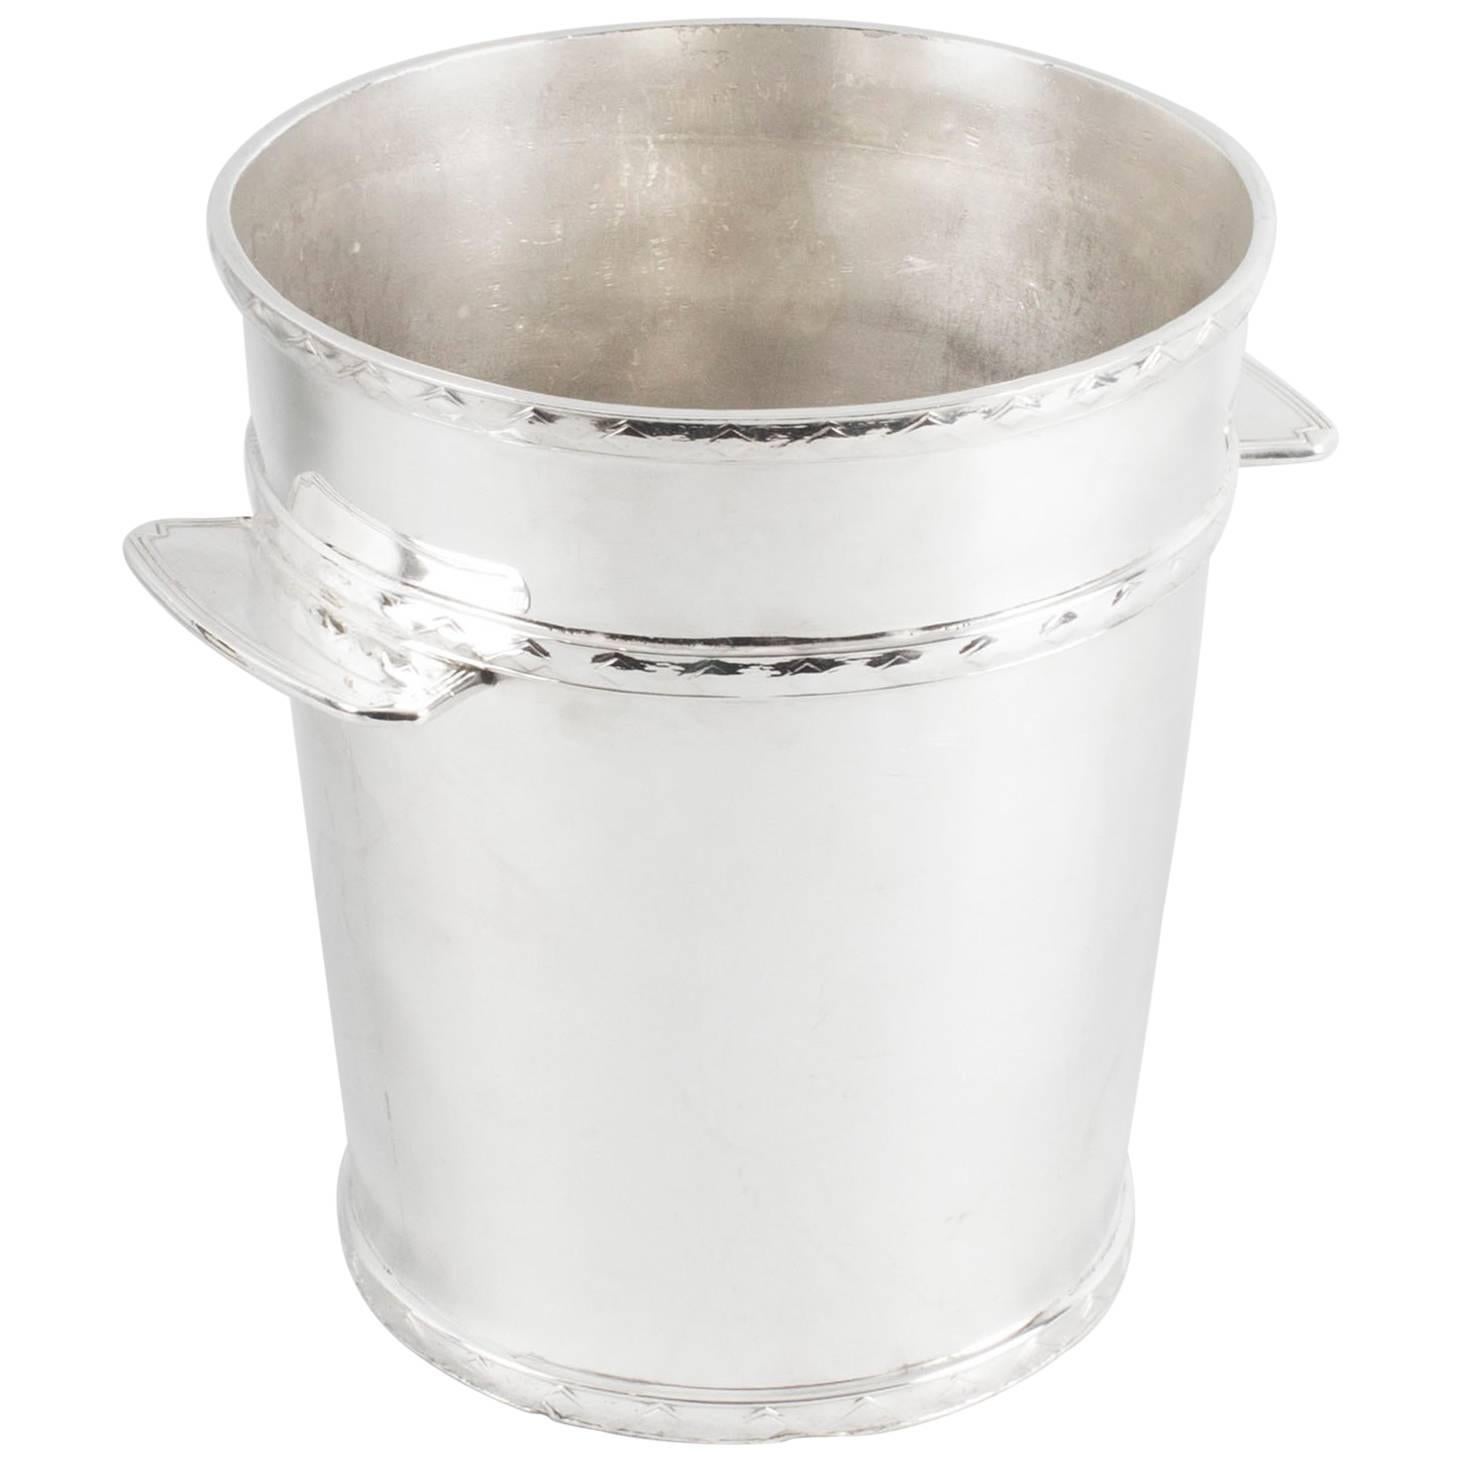 1930s Art Deco Silver Plate Ice Champagne Bucket Cooler